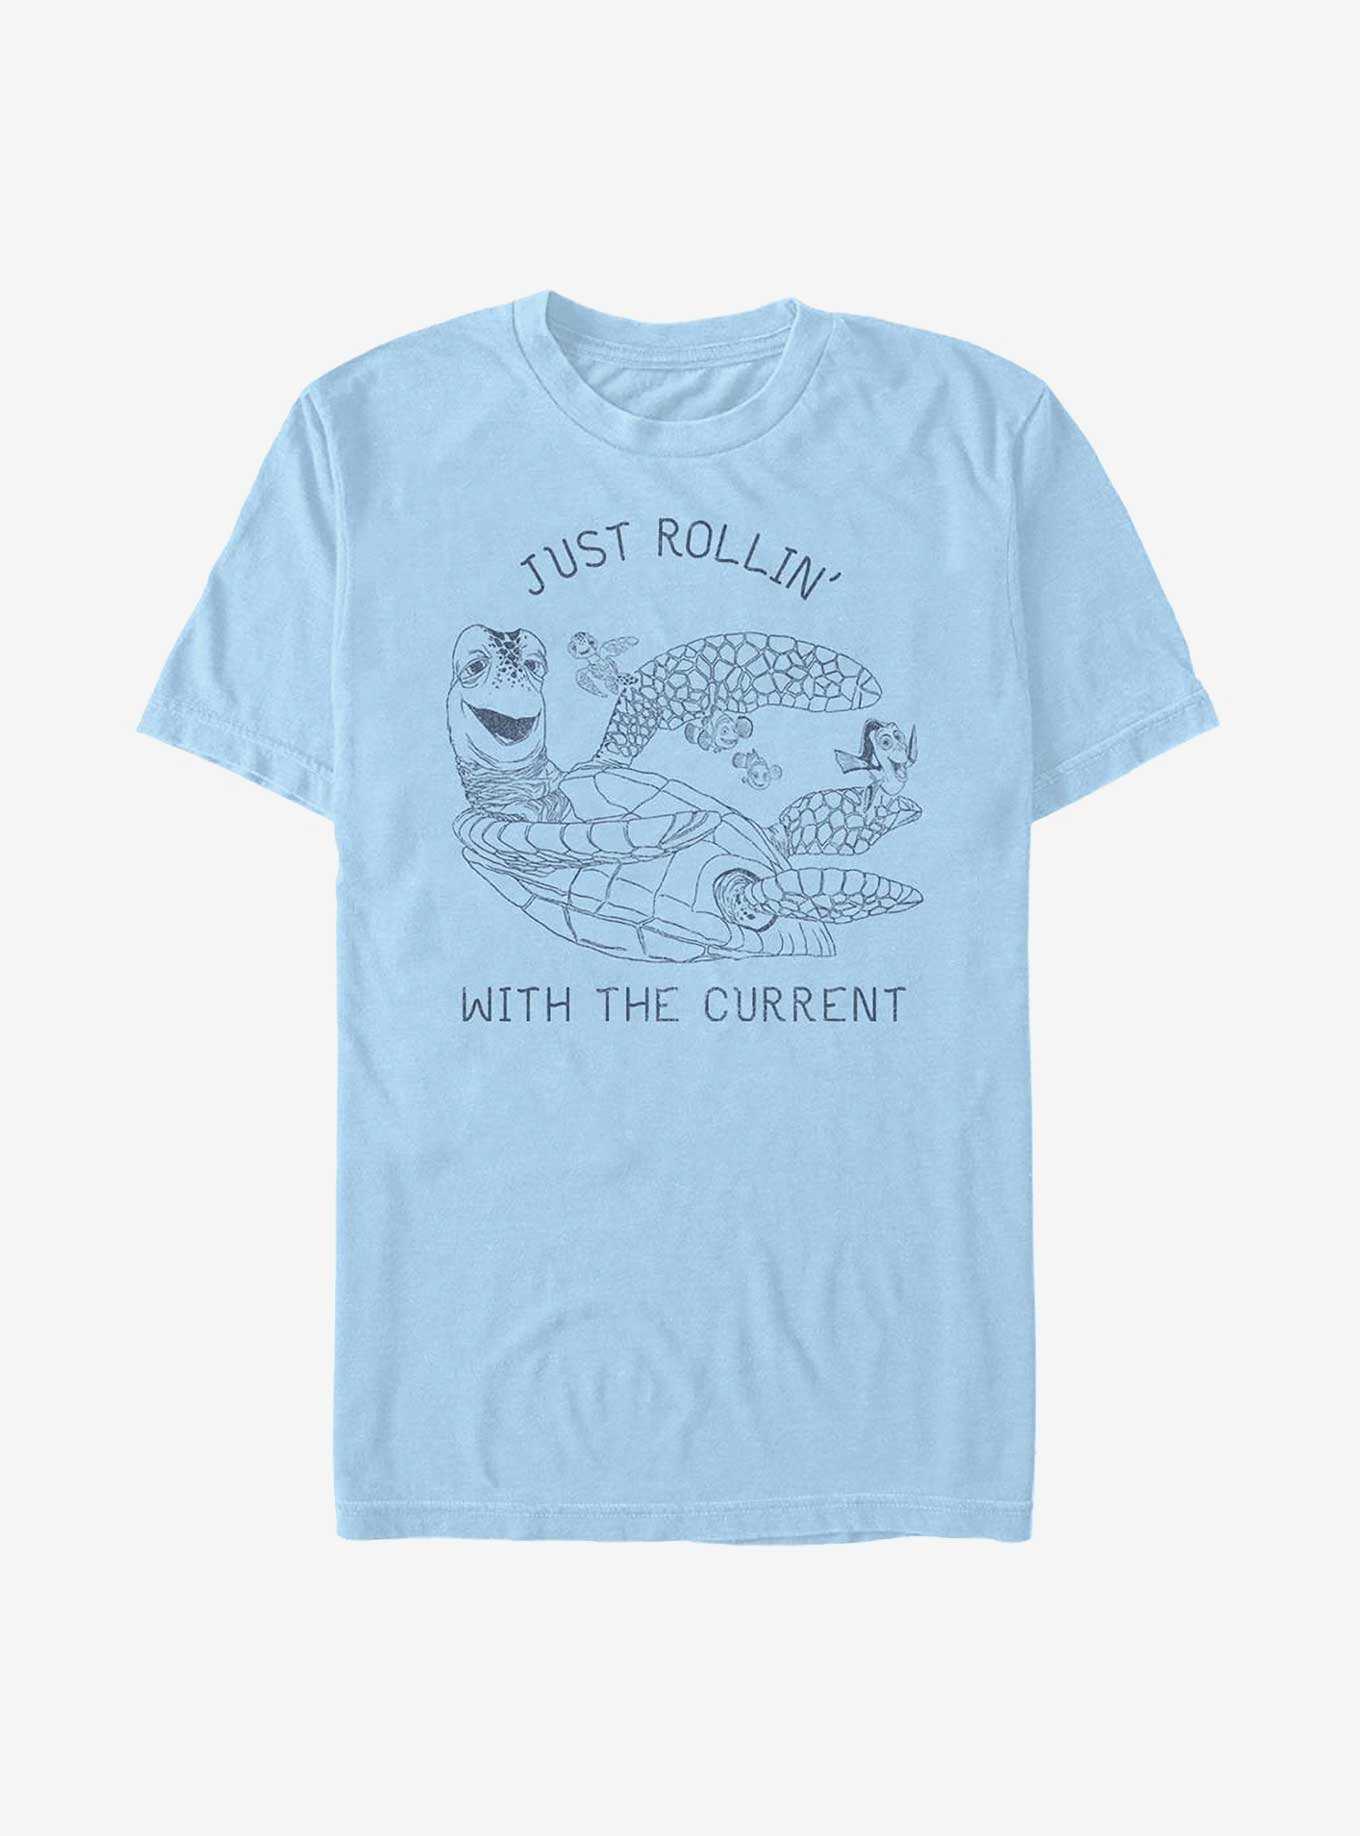 Disney Pixar Finding Nemo Crush and Squirt Just Rollin' With The Current T-Shirt, , hi-res